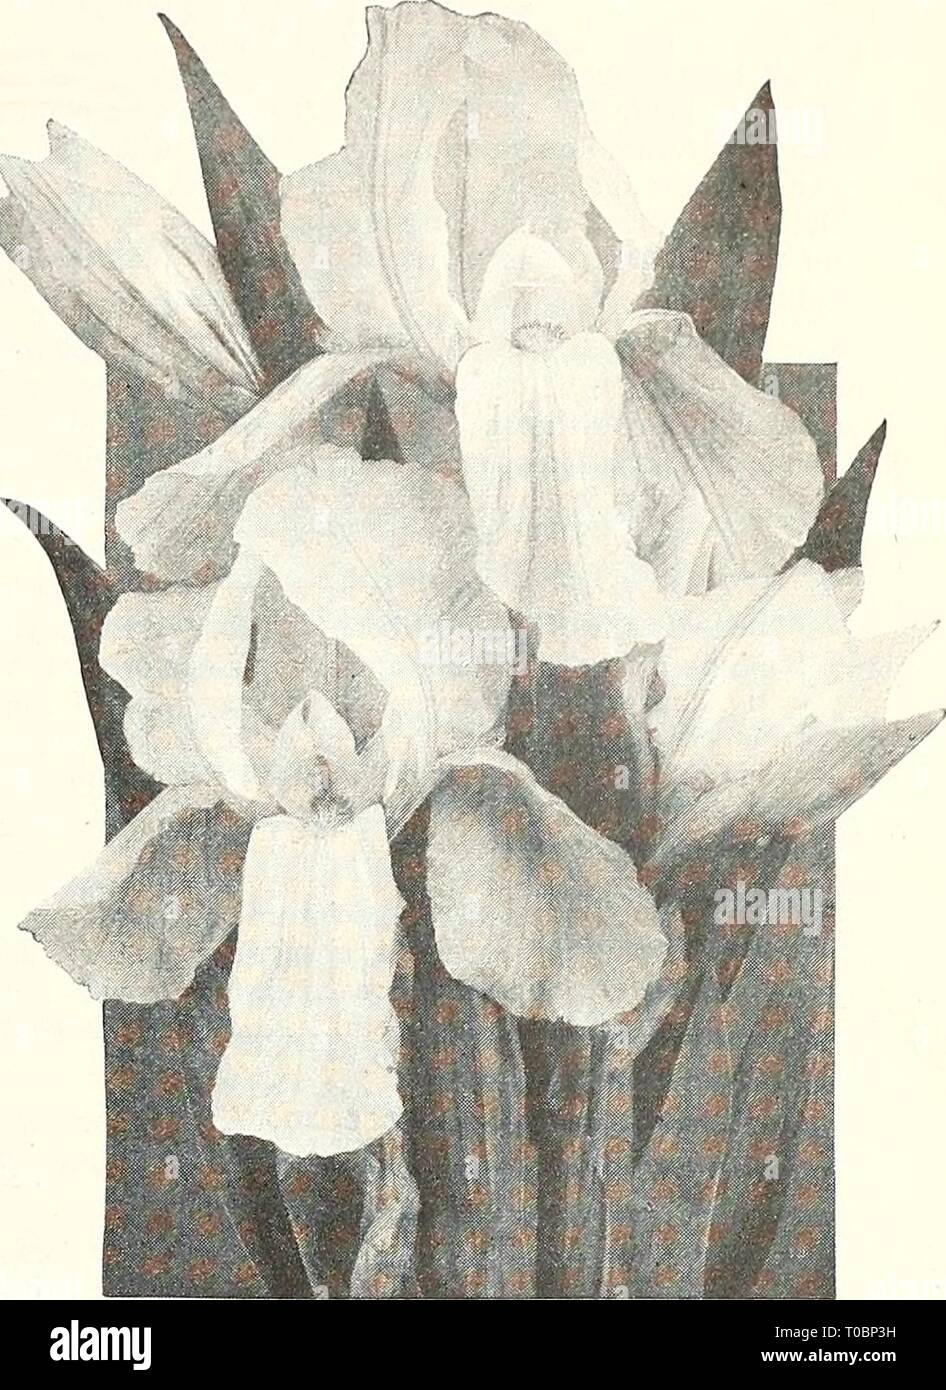 Dreer's garden book 1929 (1929) Dreer's garden book 1929 dreersgardenbook1929henr Year: 1929  (flEHRyAJREEPt,^ HARDy PERENNIAL PIANTS &gt;HILBmiffiIk 185 Japanese Iris (ins Kaempferi) The improved forms of this beautiful flower have placed them in the same rank popularly as the Hardy Phloxes and Peonies. Coming into flower about the middle of June, and continuing for 3 to 4 weeks they fill in a period when flowers of this attractive type are particularly welcome. They succeed in almost any soil and position, but like rich soil and plenty of water when they are forming their buds and developin Stock Photo